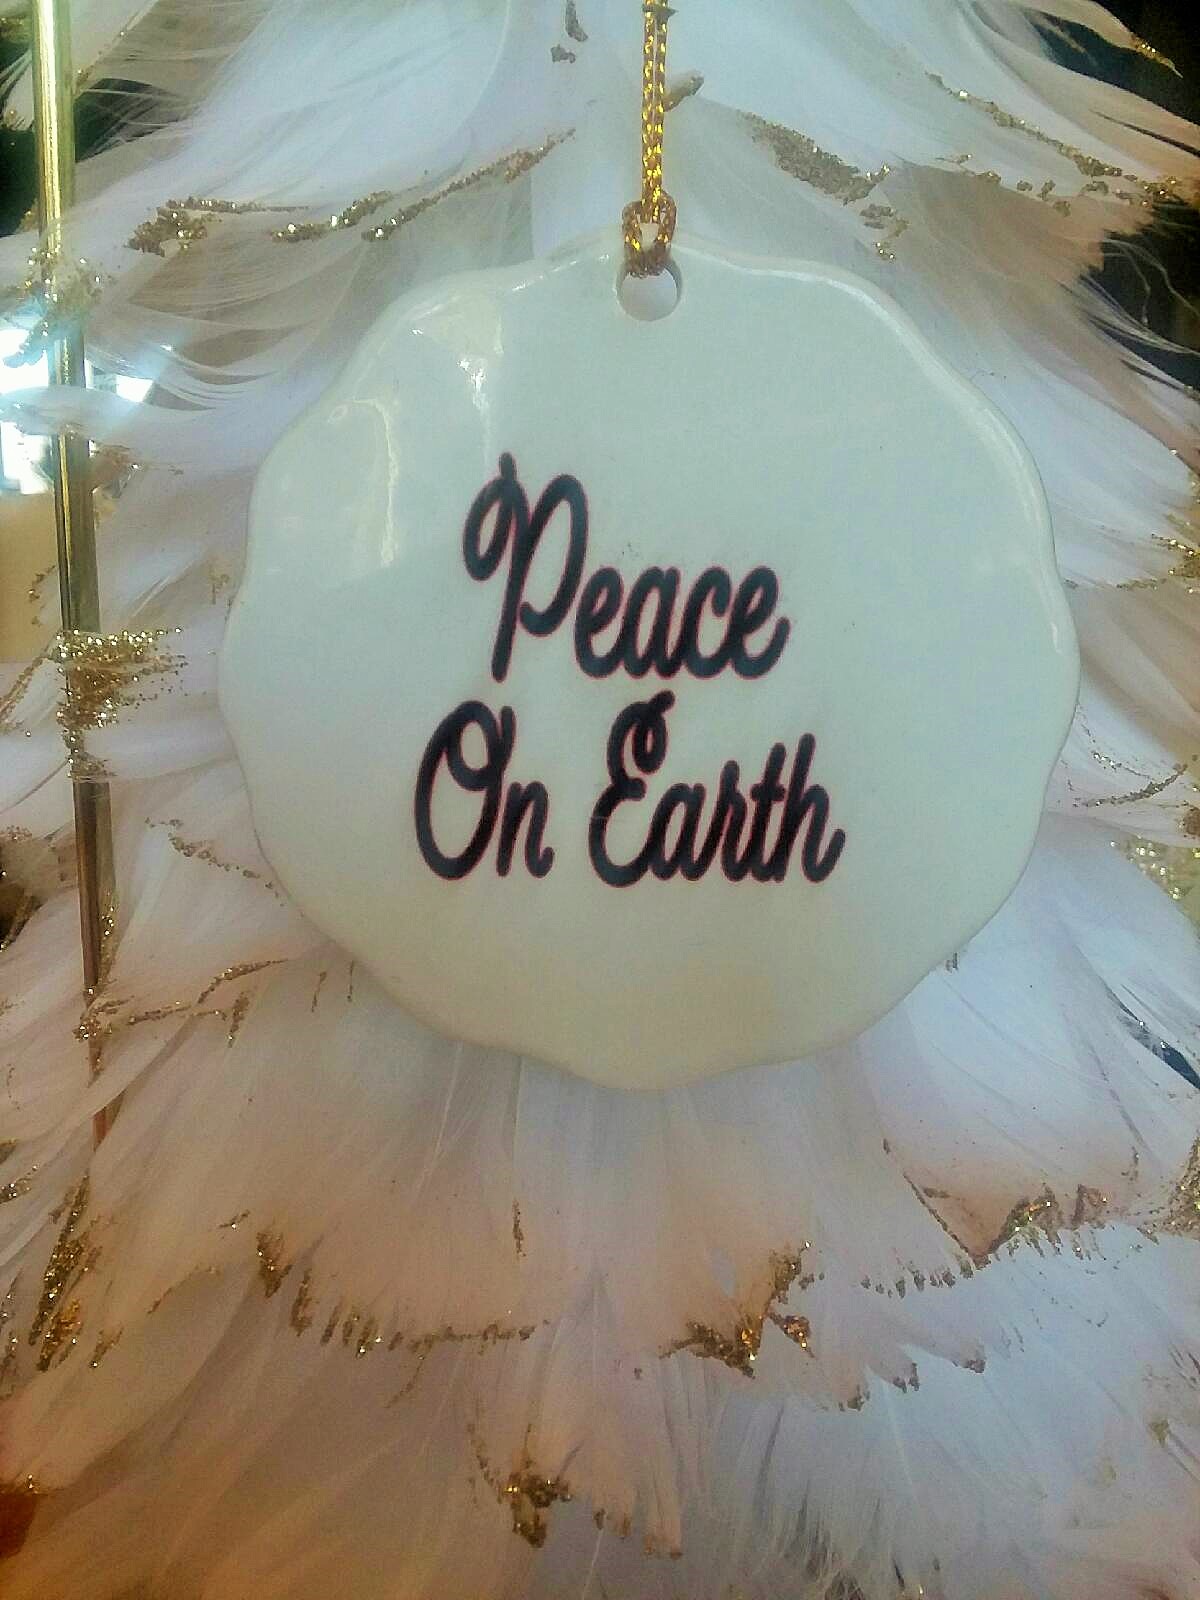 Peace On Earth made with sublimation printing